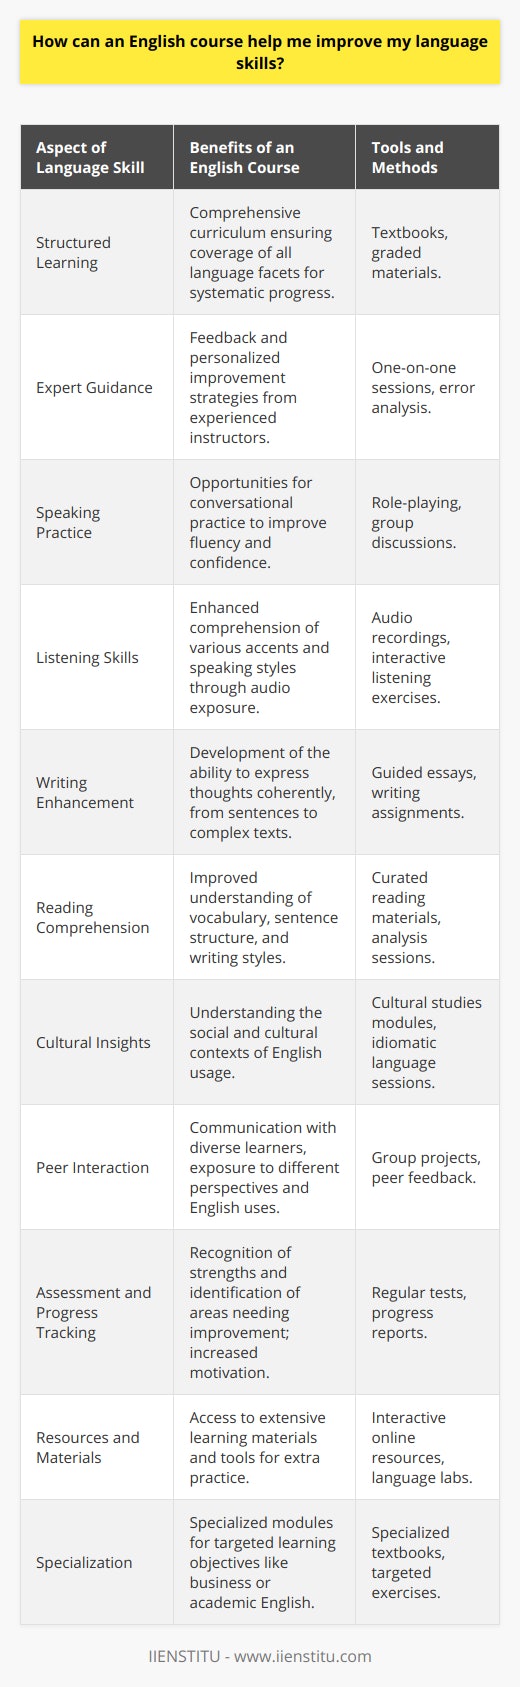 Participating in an English course offers a structured and methodical approach to learning the language, often resulting in more effective progress than learning on your own. Here are ways an English course can enhance your language skills:1. **Structured Learning**: An English course follows a curriculum designed to cover all aspects of language learning, including grammar, vocabulary, pronunciation, reading, writing, speaking, and listening. This structure ensures that learners progress through different levels of language proficiency, building on the skills they've acquired in a systematic manner.2. **Expert Guidance**: Instructors in an English course are typically well-trained and experienced in teaching English as a second language. They provide expert feedback on your language use, correct mistakes, and offer strategies for improvement, which is hard to get when studying independently.3. **Speaking Practice**: Many language learners lack the opportunity to practice speaking English. An English course often includes conversational practice, role-playing, and discussions that help you use English in realistic situations, thereby improving your fluency and confidence.4. **Listening Skills**: Through listening exercises, such as comprehending audio recordings or lectures, learners can enhance their ability to understand spoken English. This exposure to different accents and speaking styles is valuable for real-world communication.5. **Writing Enhancement**: An English course usually encompasses various writing activities, which are essential for developing the ability to express thoughts coherently in English. This includes everything from simple sentences to complex essays or reports.6. **Reading Comprehension**: Courses often provide reading materials appropriate to your level. These might include short stories, news articles, or excerpts from novels. Reading regularly enhances vocabulary, understanding of sentence structure, and exposure to different writing styles.7. **Cultural Insights**: Understanding the cultural context in which a language is used is pivotal. An English course can introduce you to cultural nuances, idiomatic expressions, and social customs, preventing misunderstandings and enabling you to use English more appropriately.8. **Peer Interaction**: Learning with others offers the chance to communicate with fellow learners. This social aspect can keep you motivated and also provides exposure to different perspectives and uses of English.9. **Assessment and Progress Tracking**: Regular assessments and feedback help you to recognize your strengths and identify areas where you need additional practice. Progress tracking can increase your motivation and provides a sense of accomplishment as you move through the course.10. **Resources and Materials**: English courses provide a wealth of resources that may be difficult to compile on your own. These include textbooks, online materials, interactive exercises, and possibly access to language labs or digital platforms for additional practice outside of class.11. **Specialization**: Some English courses offer specialized modules tailored to specific objectives like business English, academic writing, or test preparation (e.g., for TOEFL or IELTS). Targeted learning can be highly effective for specific purposes.An institution like IIENSTITU may offer a suite of resources along with a well-designed curriculum to enhance your English language skills effectively. By engaging with such courses, learners can transform their language learning journey, equipping themselves with the linguistic abilities necessary to excel in both personal and professional realms. Whether you're looking to refine your conversational fluency, improve your academic writing, or expand your business terminology, an English course can provide a valuable road map to achieving these goals.